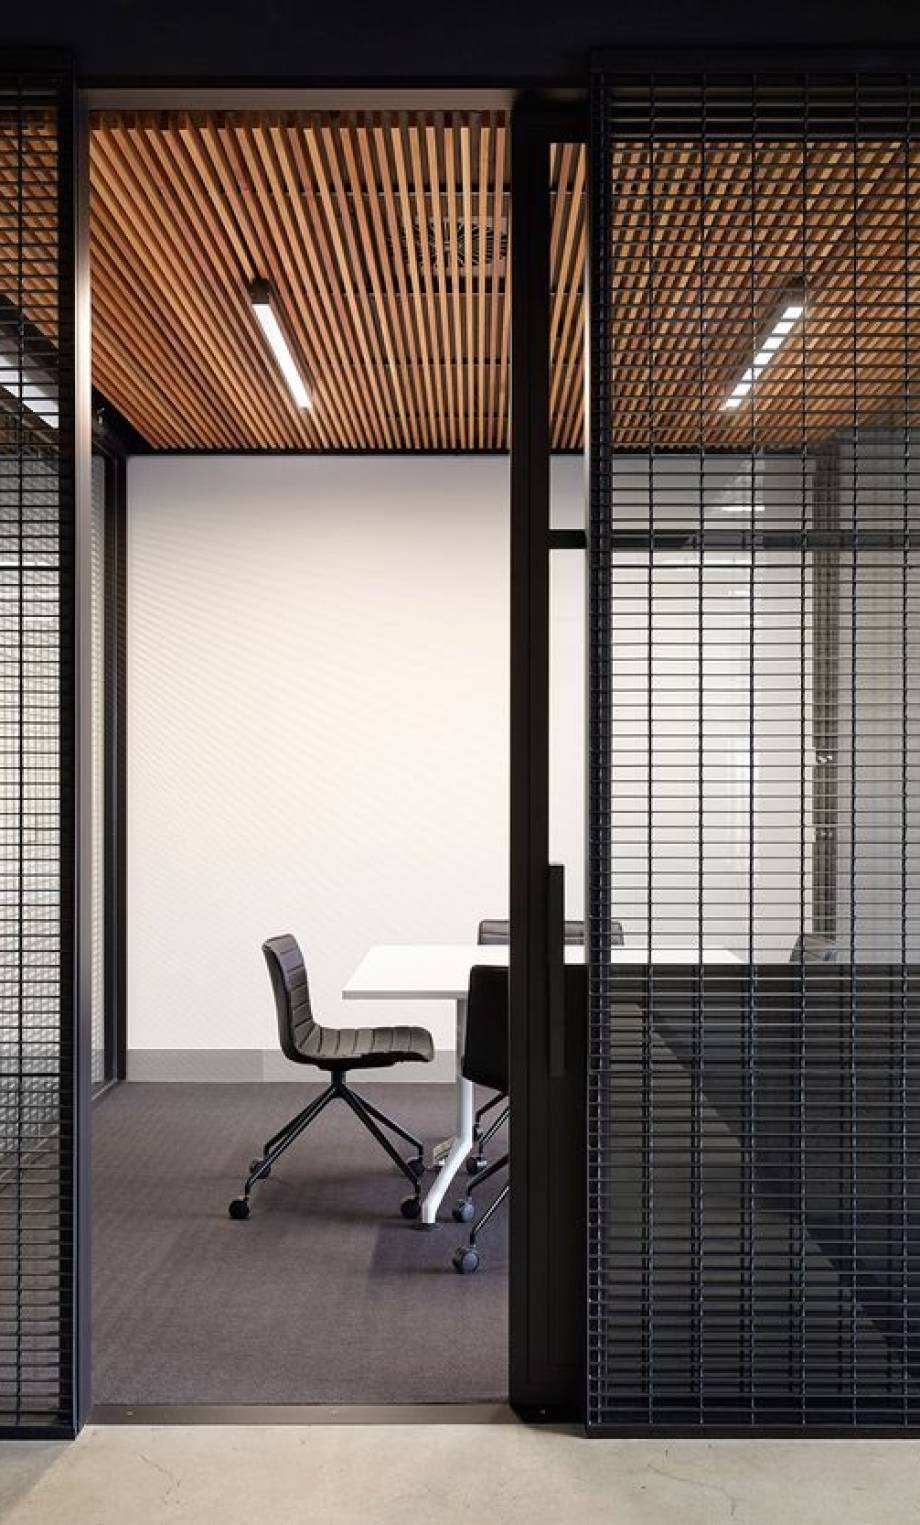 An Office with slats covering the perimeter.